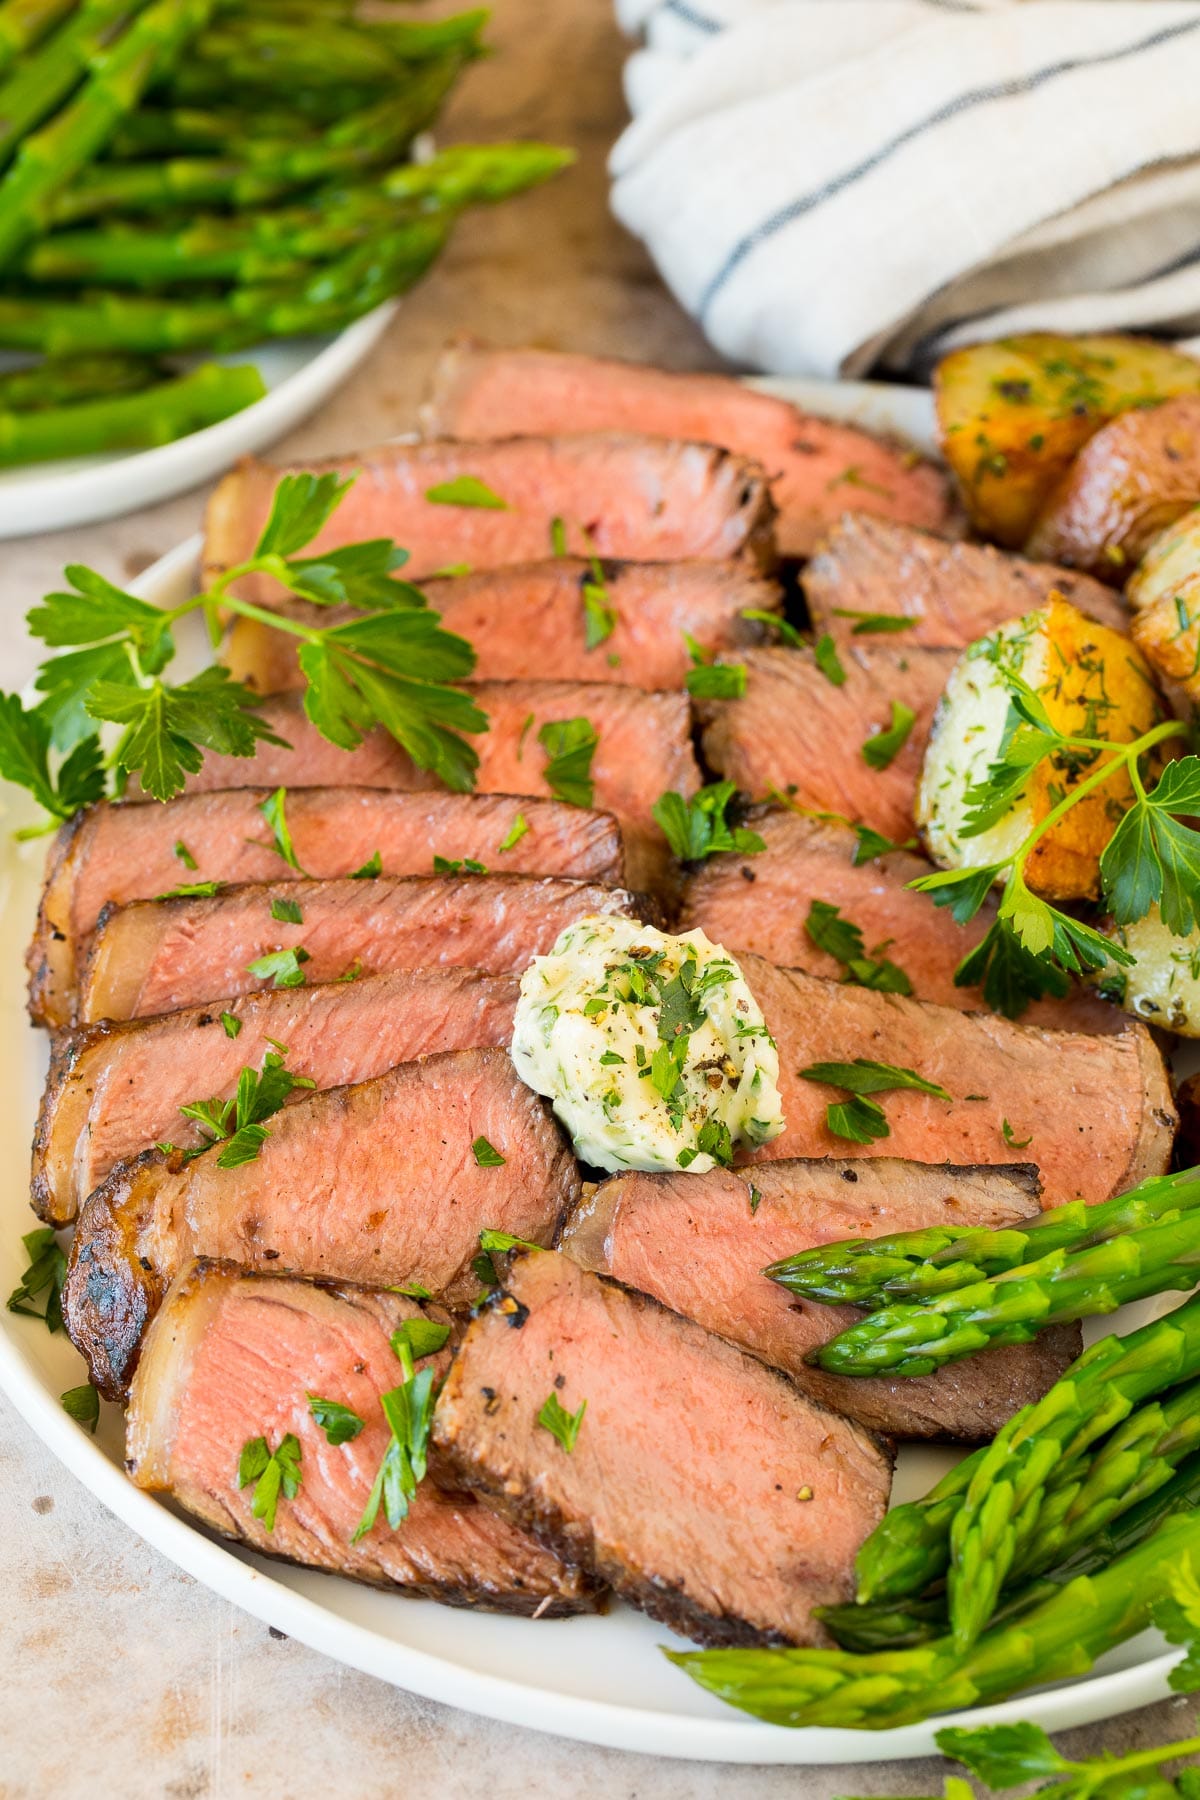 Steak sliced on a platter, topped with herb butter and parsley.